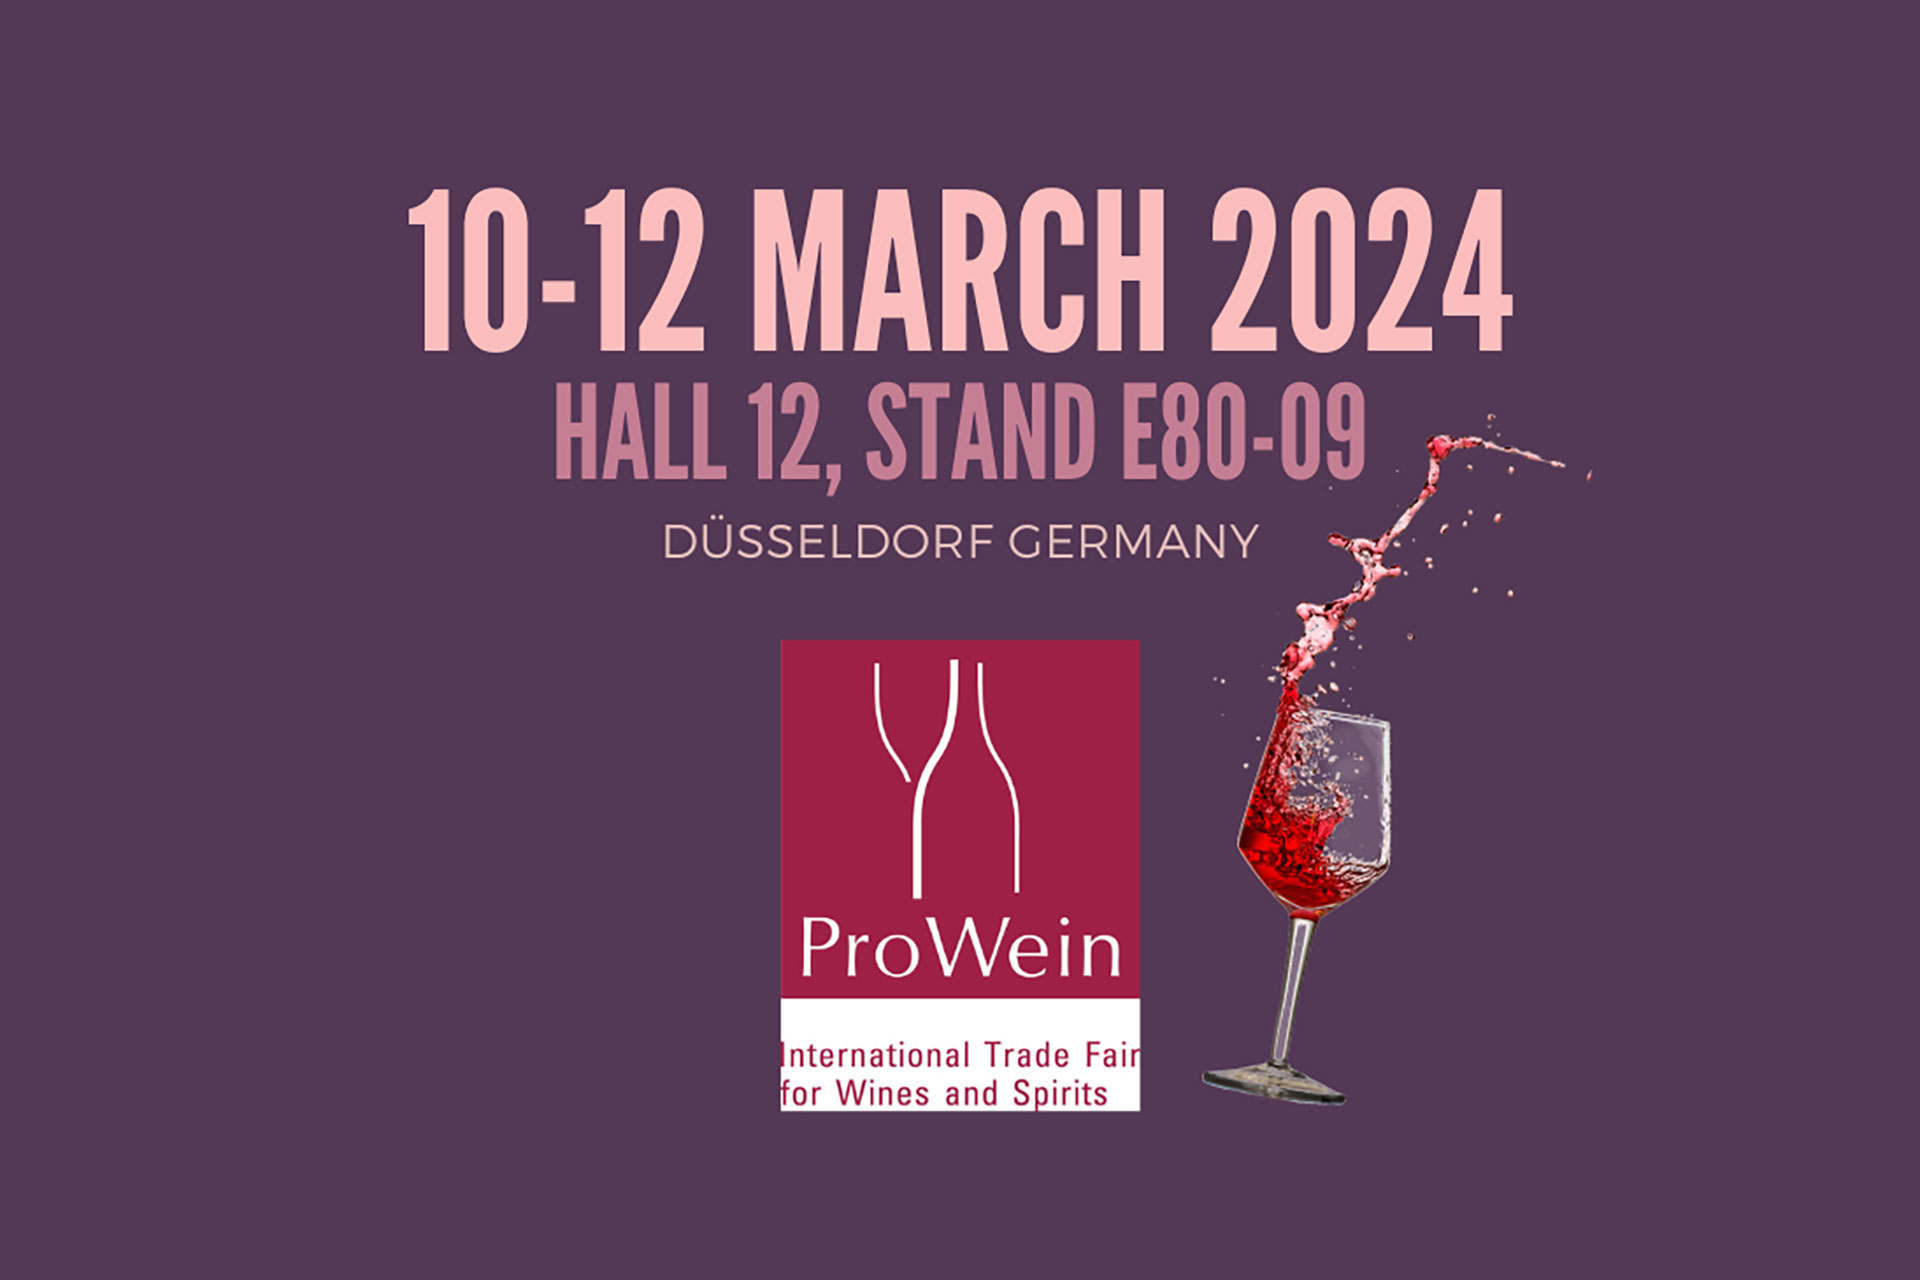 We participate in ProWein on March 10-12 Room 12 Stand E80-09